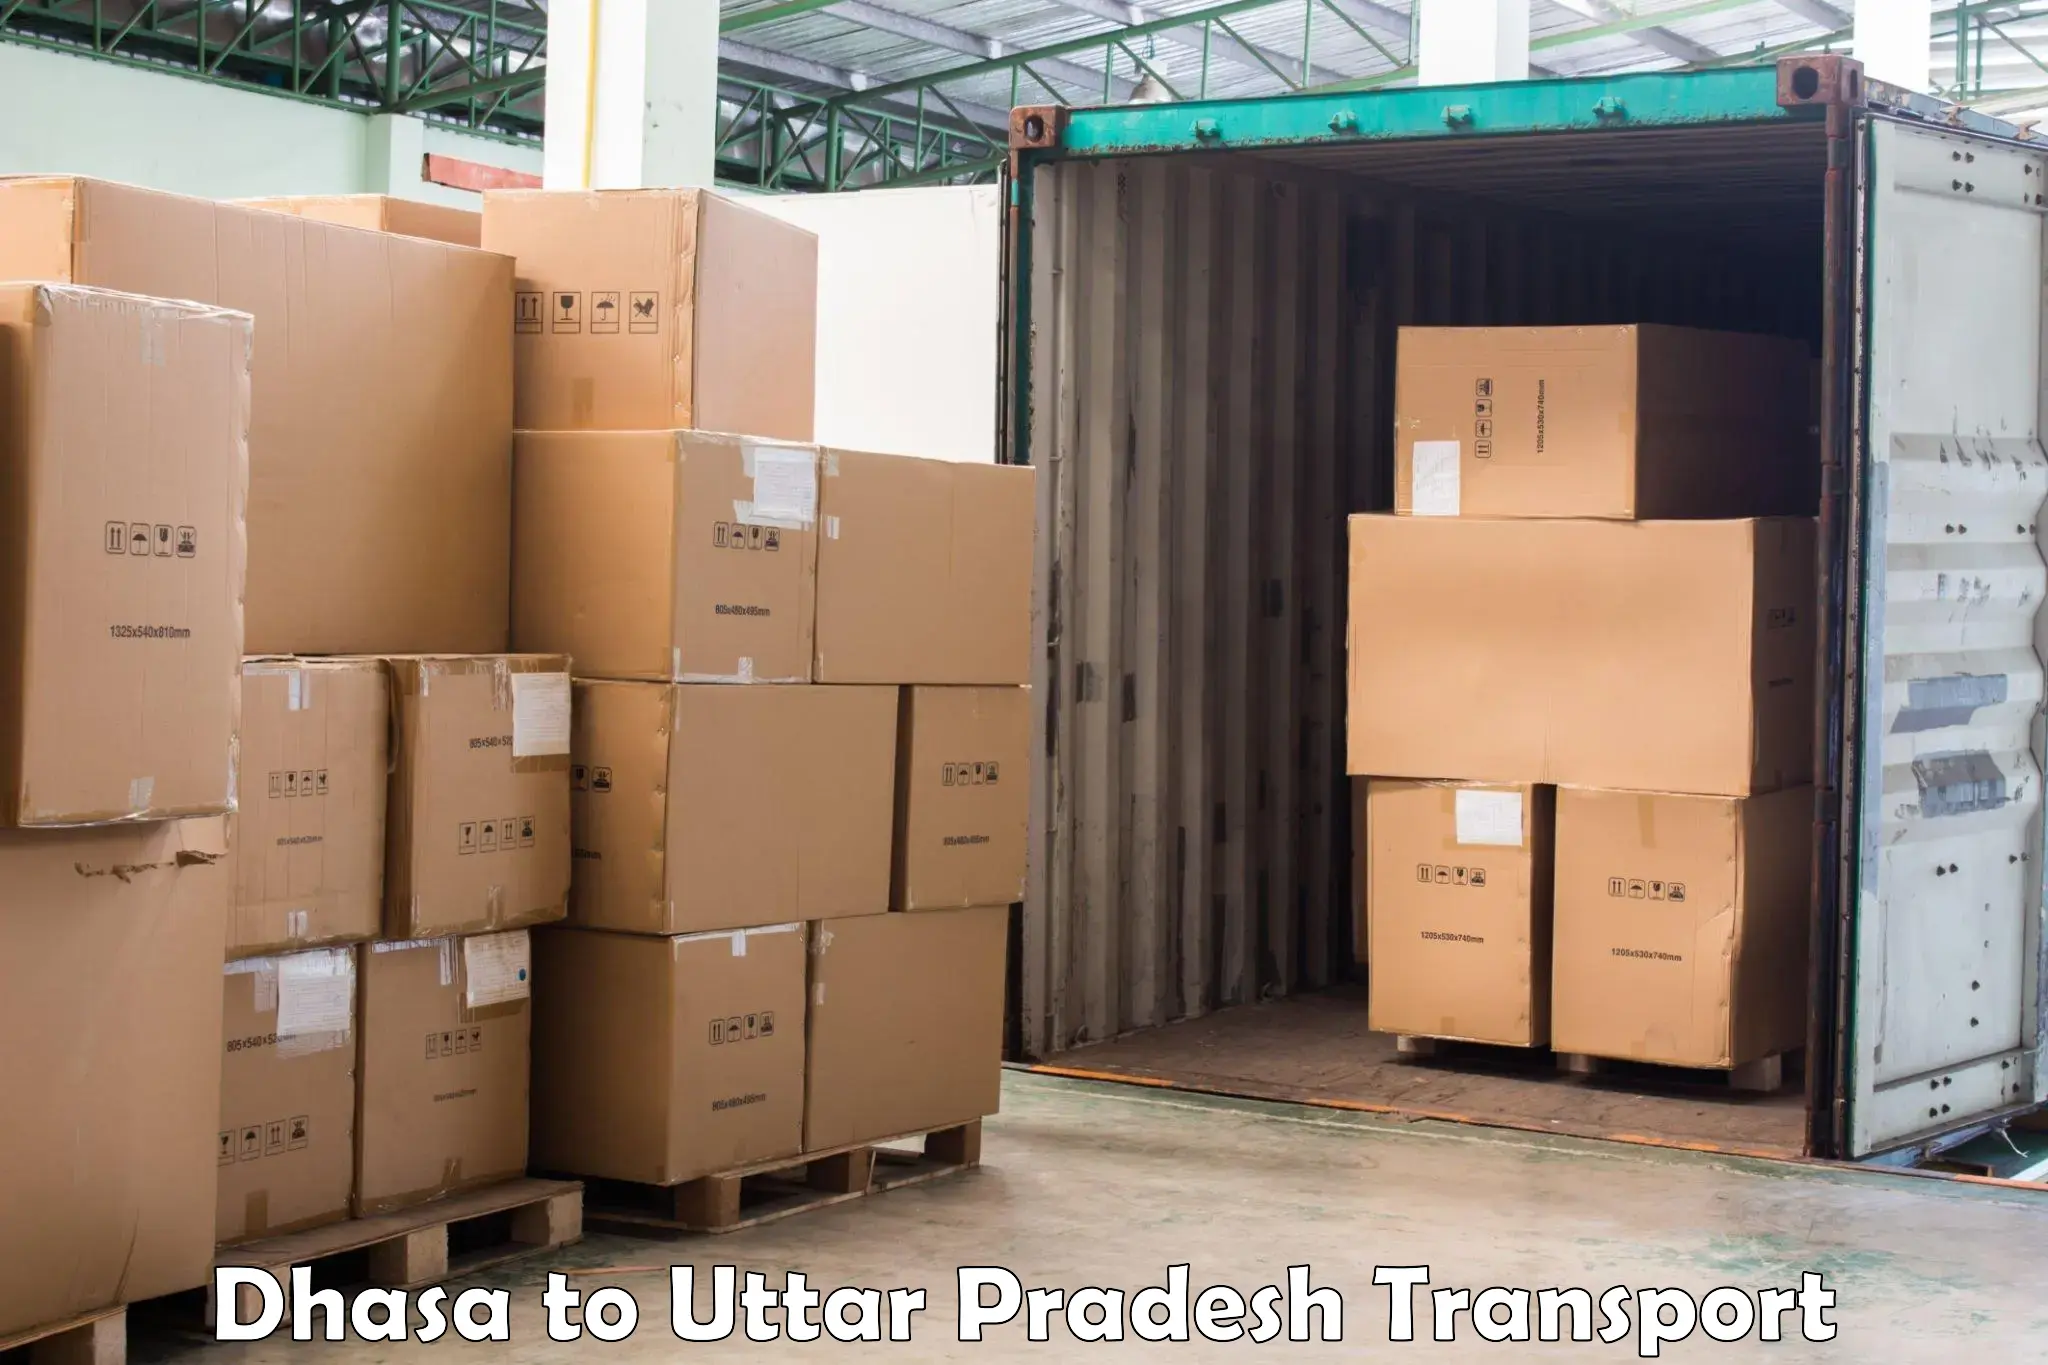 Daily parcel service transport Dhasa to Pukhrayan